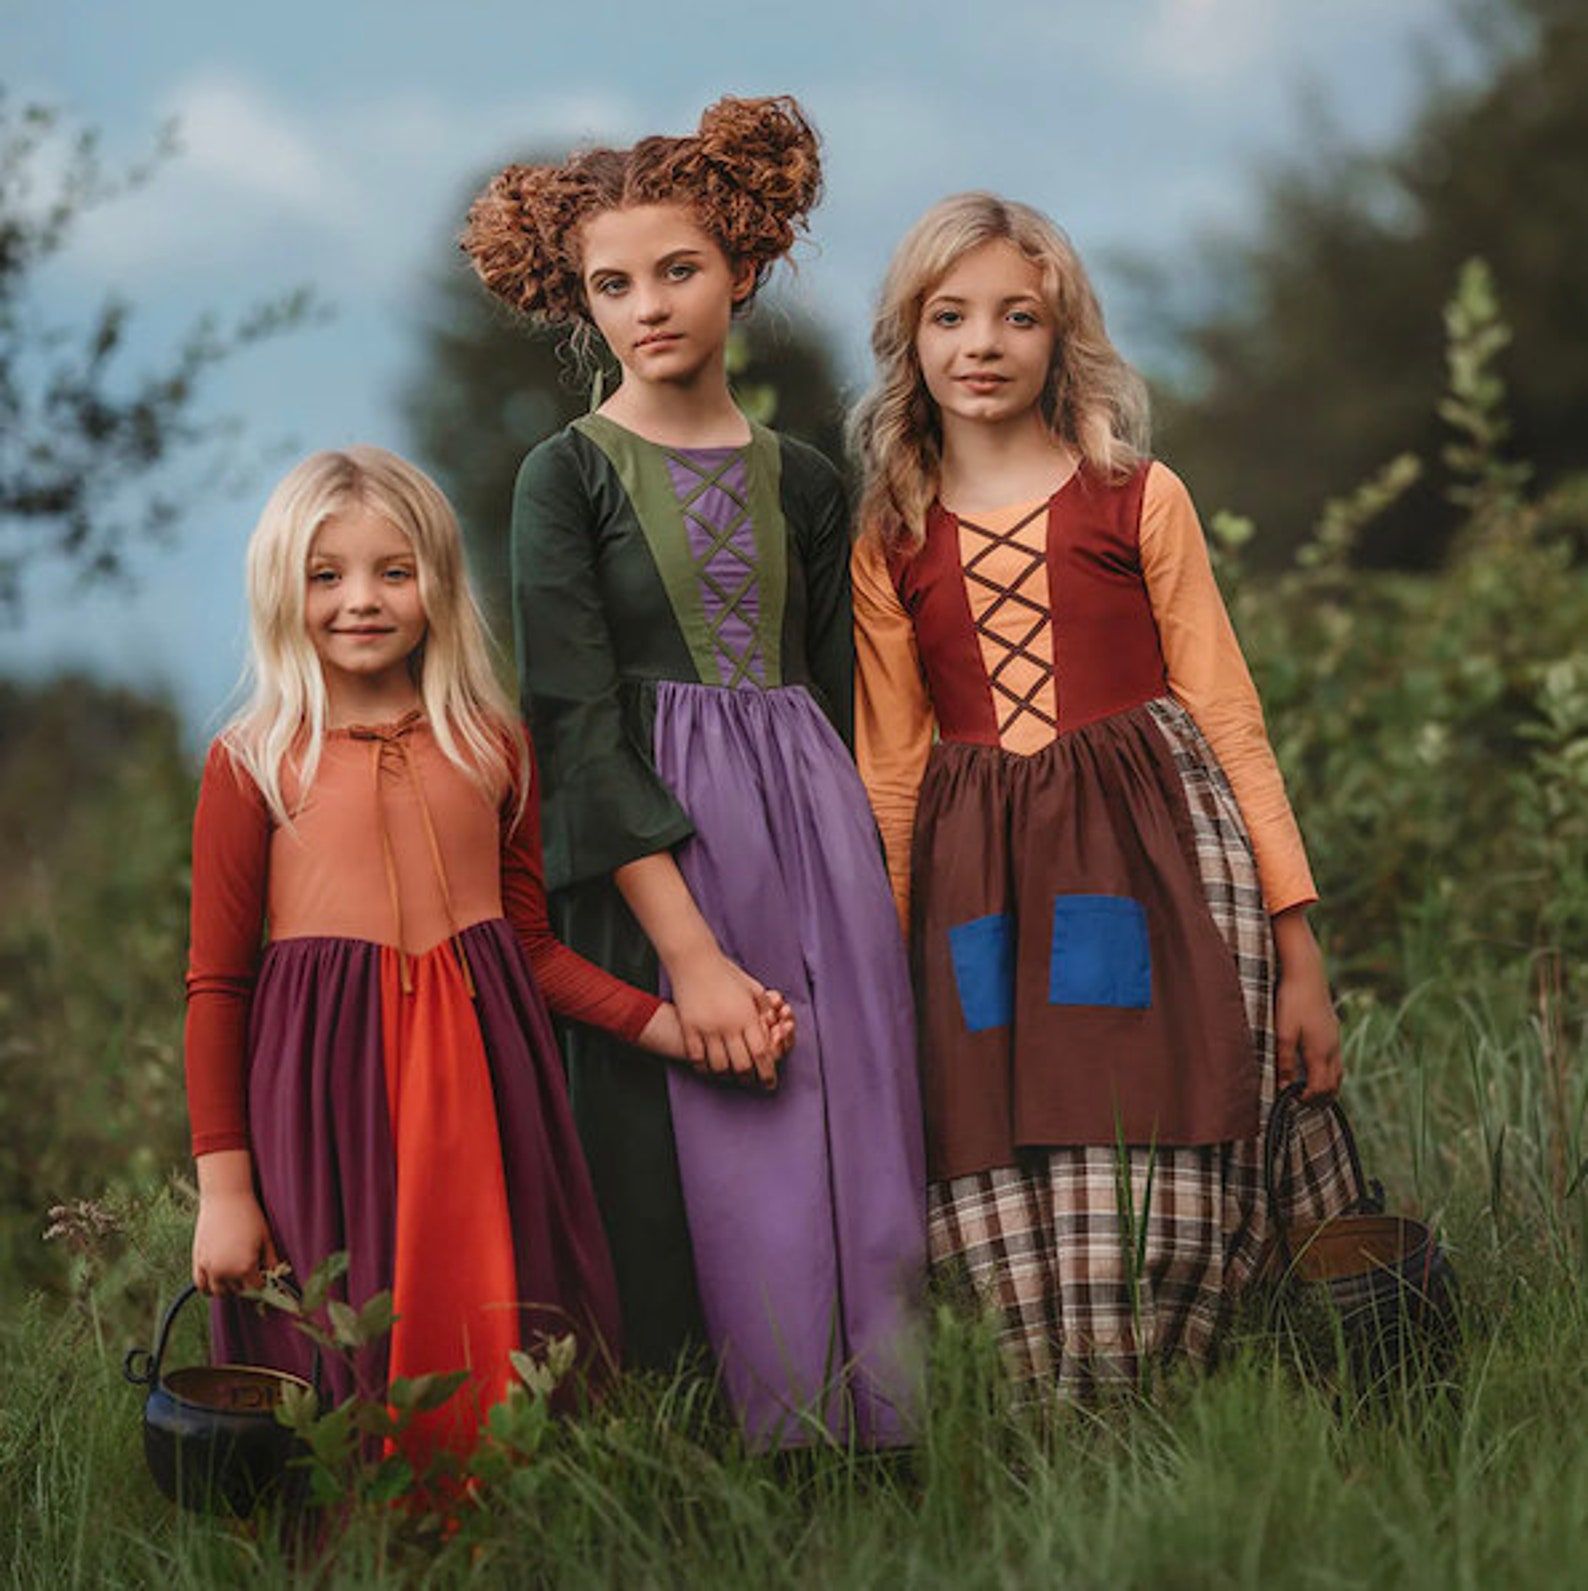 The Best Disney Halloween Costumes For Adults And Kids: Sanderson Sisters